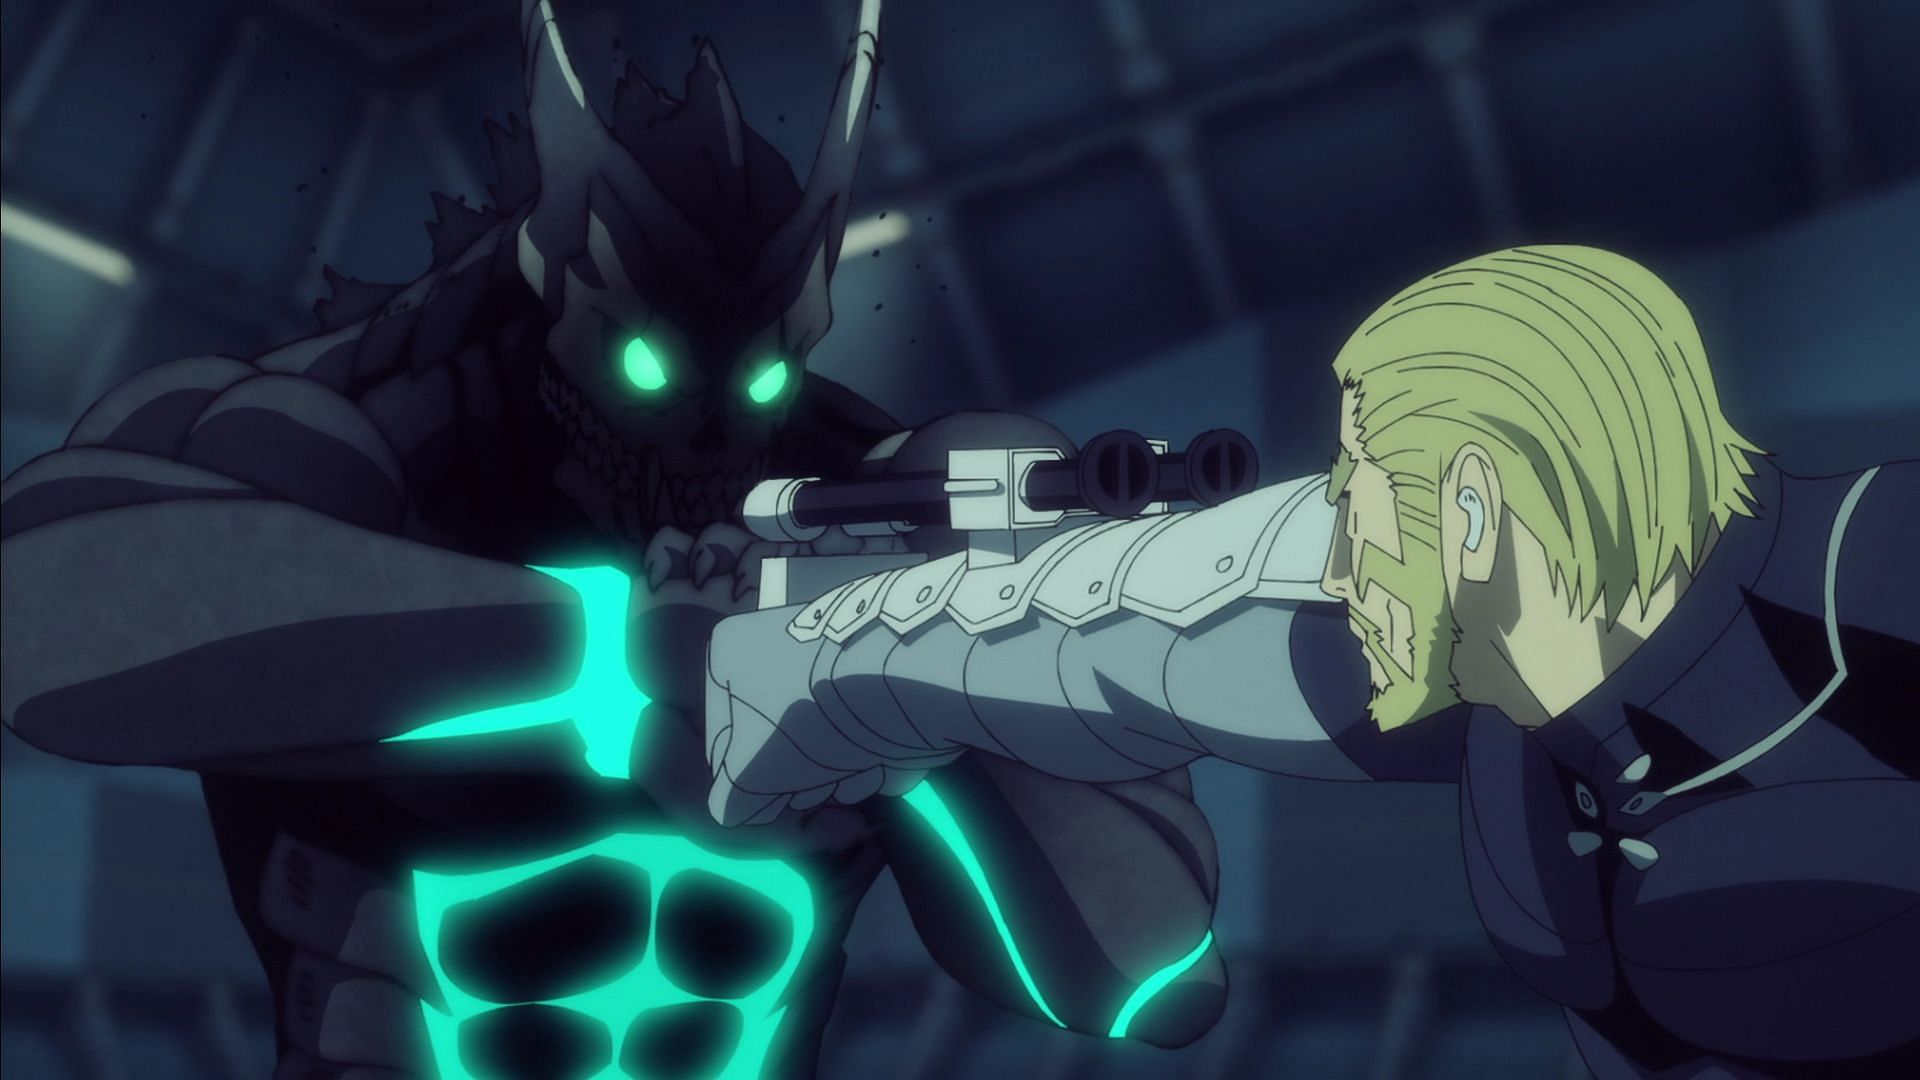 Kafka and Isao&#039;s fight rages on in Kaiju No. 8 episode 12&#039;s opening scenes (Image via Production I.G)